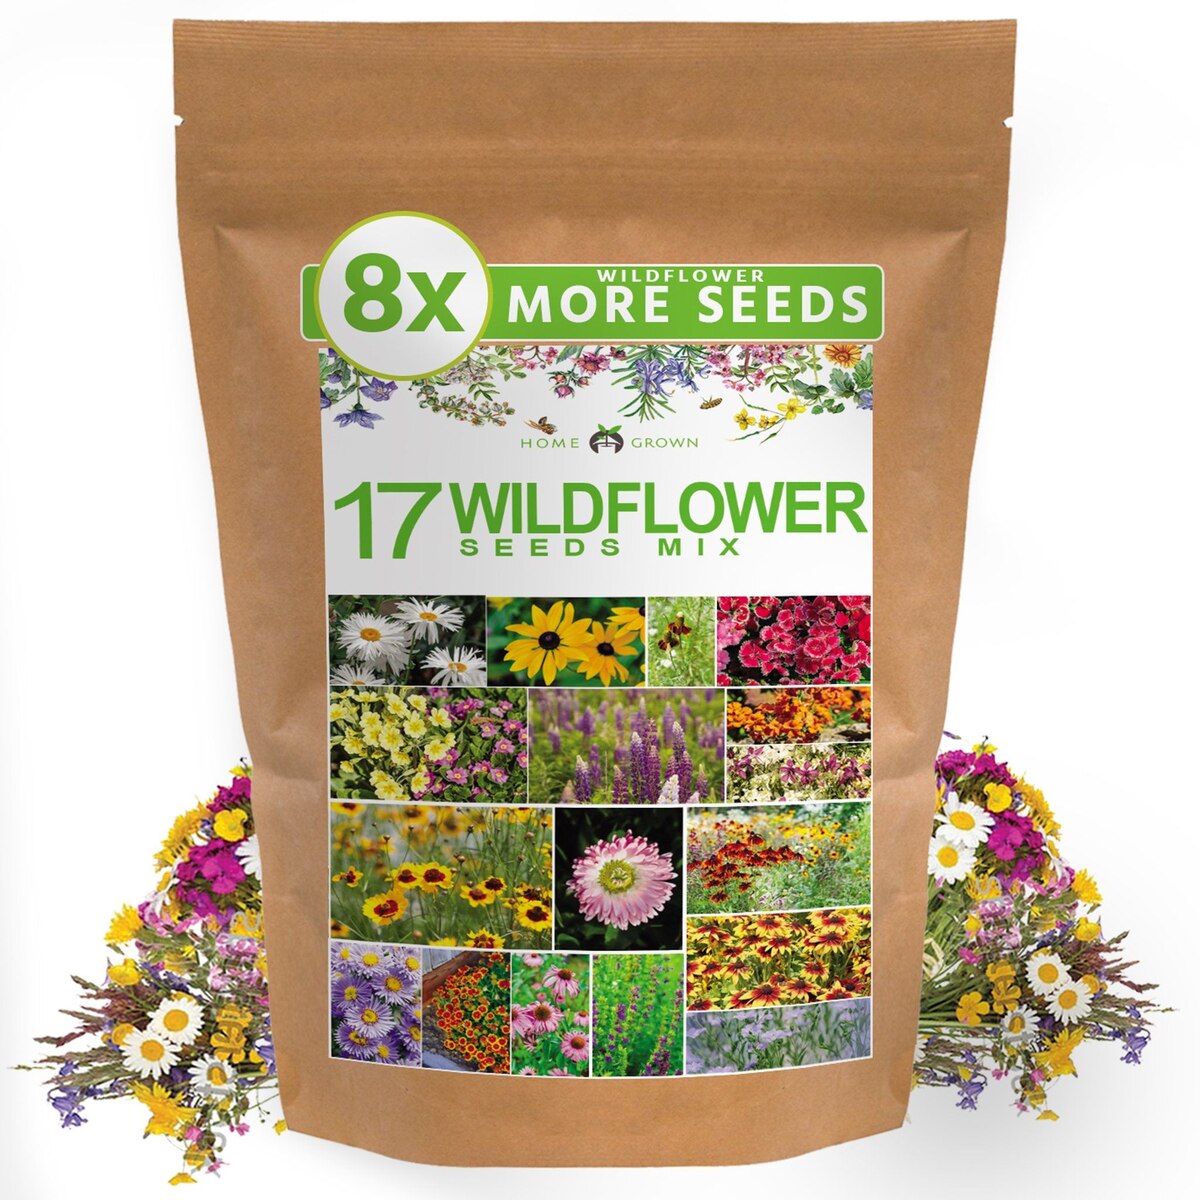 The Mix For Wildflower Seeds When Sowing Seeds